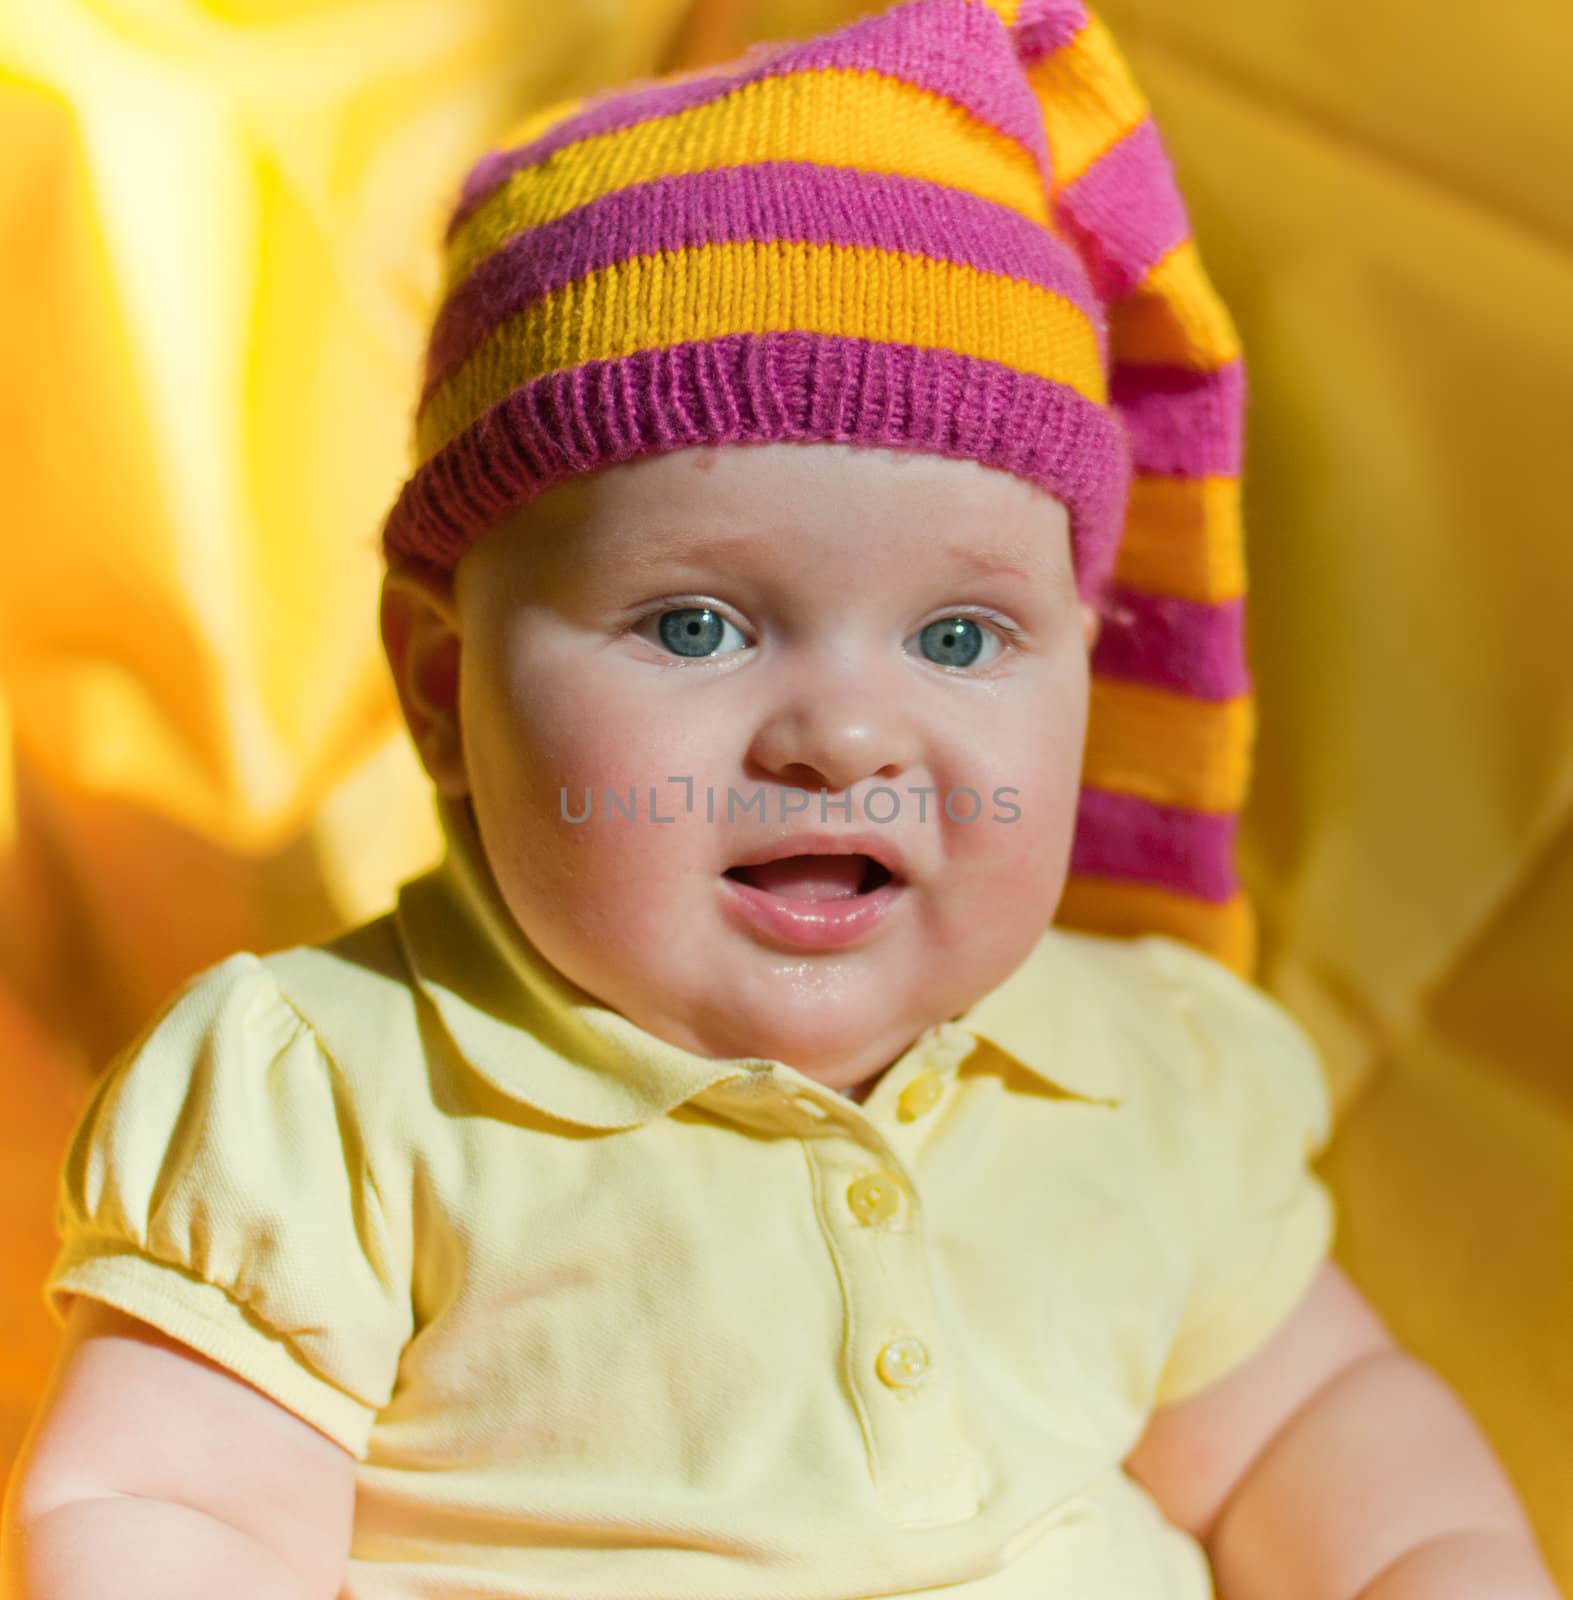 Baby in hat by Linaga